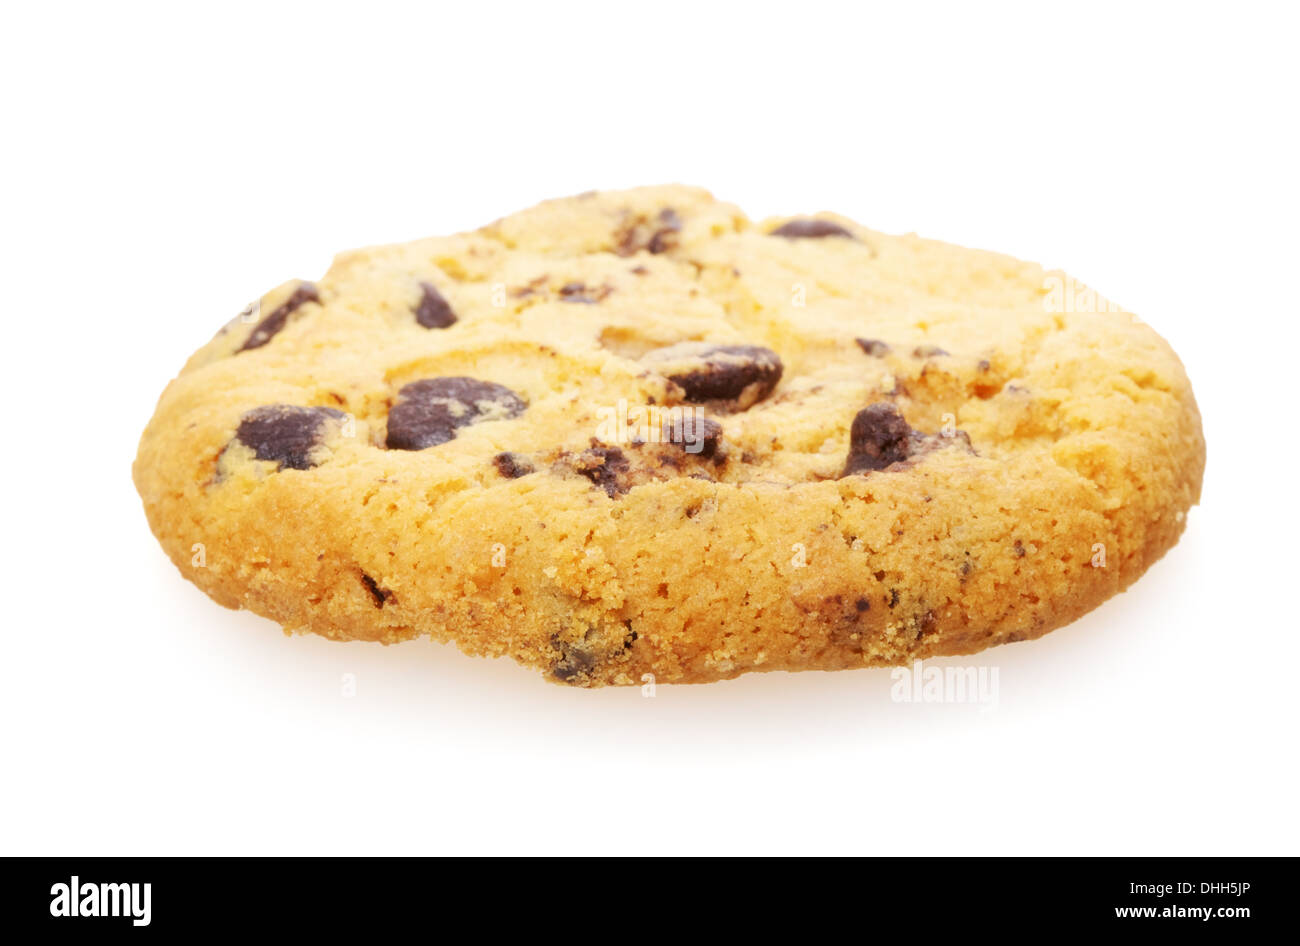 Homemade Cookie With Chocolate Chips Stock Photo